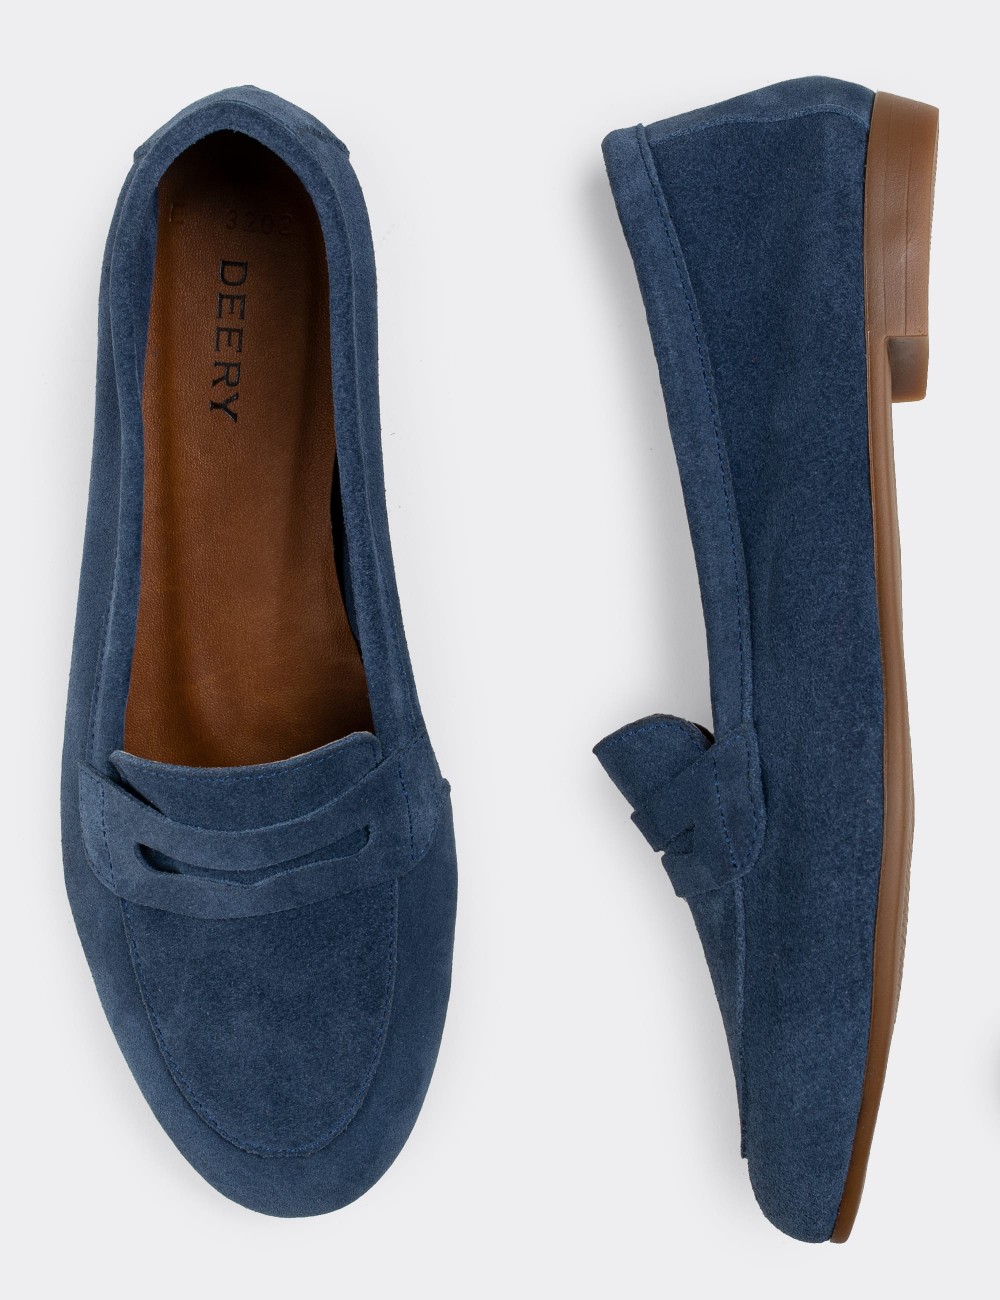 Blue Suede Leather Loafers - E3202ZMVIC01